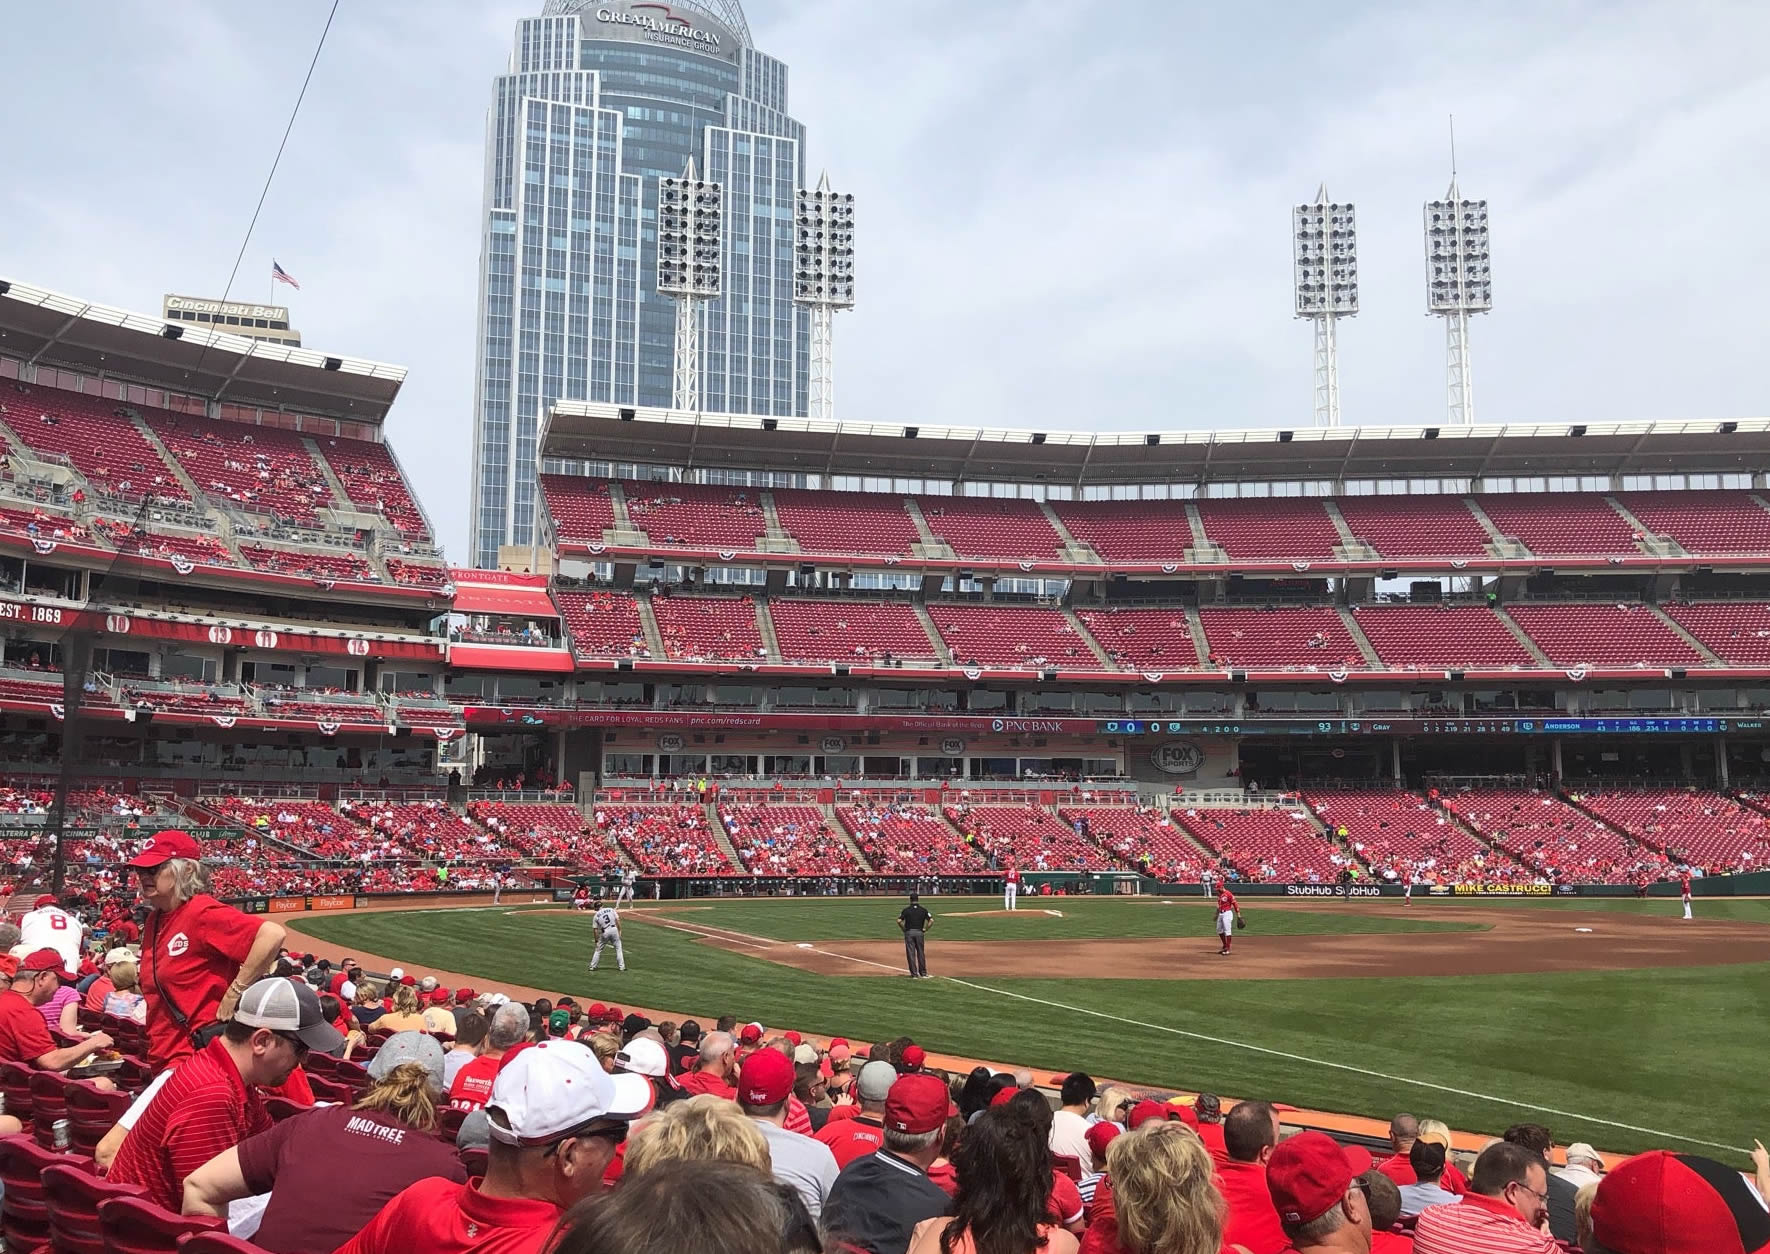 Section 135 at Great American Ball Park 